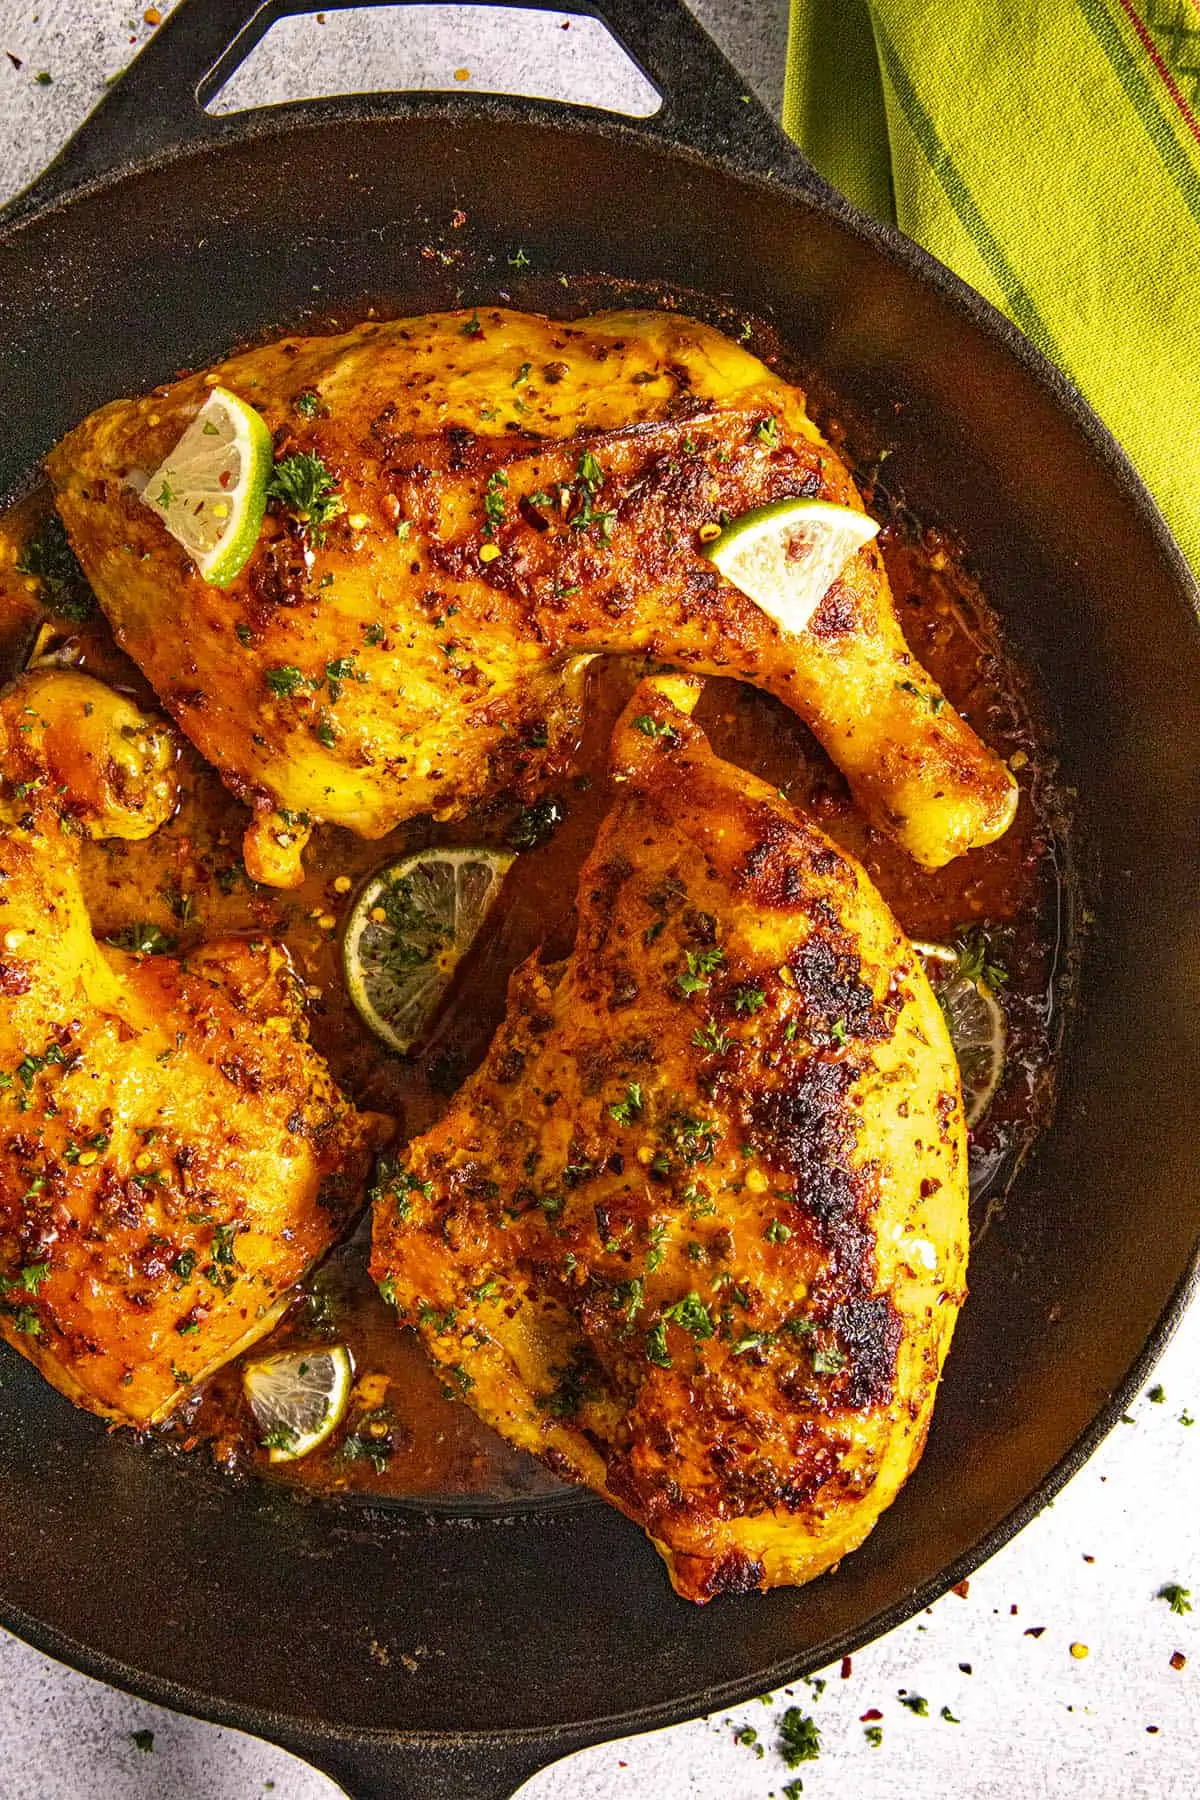 Moist and juicy Pollo Asado (Mexican roast chicken) garnished with lime wedges